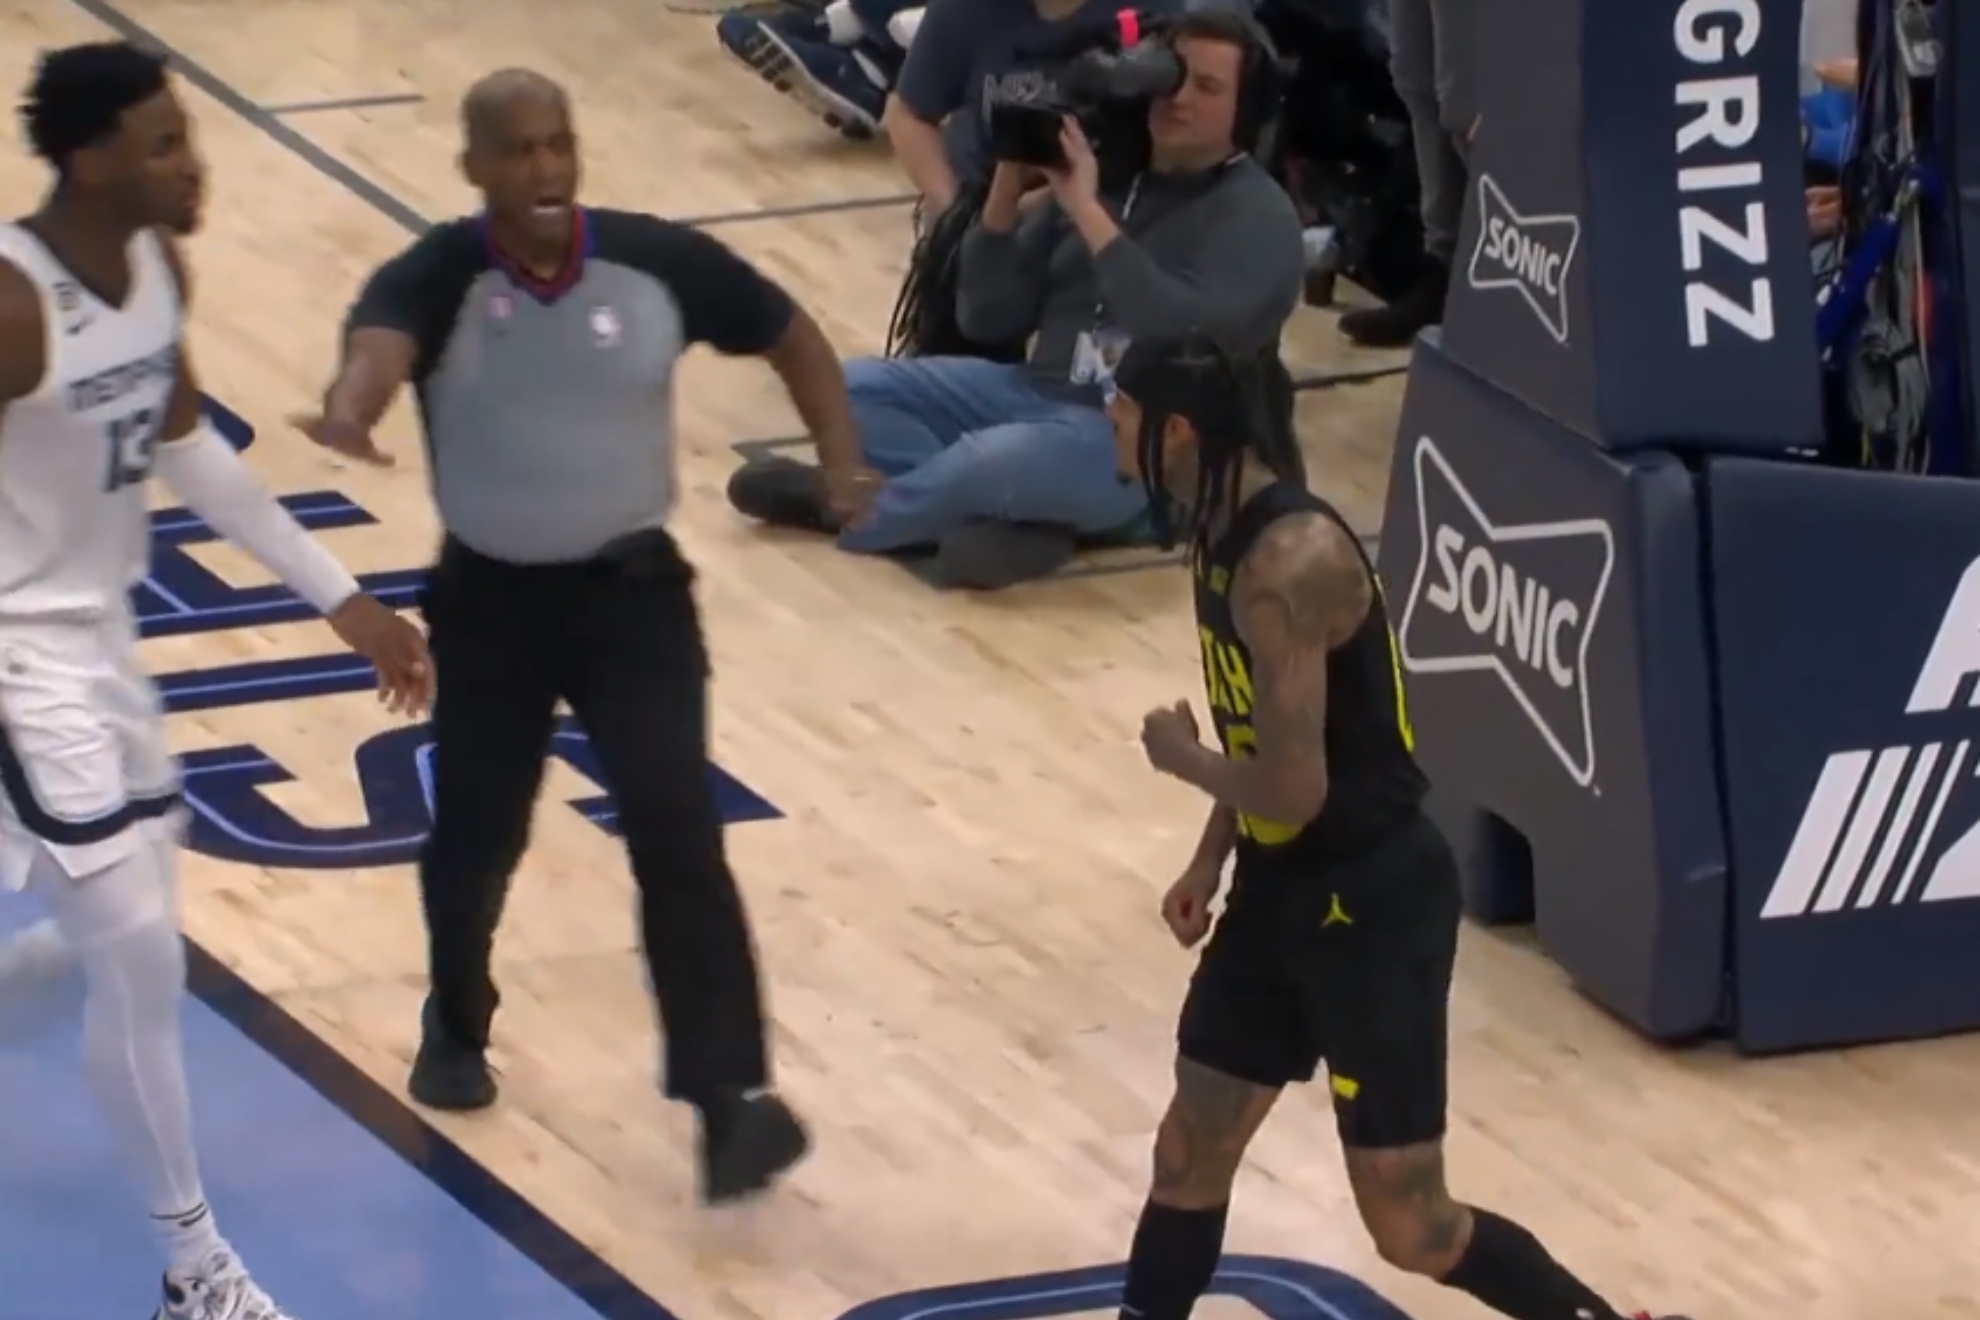 Clarksons antics vs the Grizzlies: Responds after flagrant foul and gets ejected